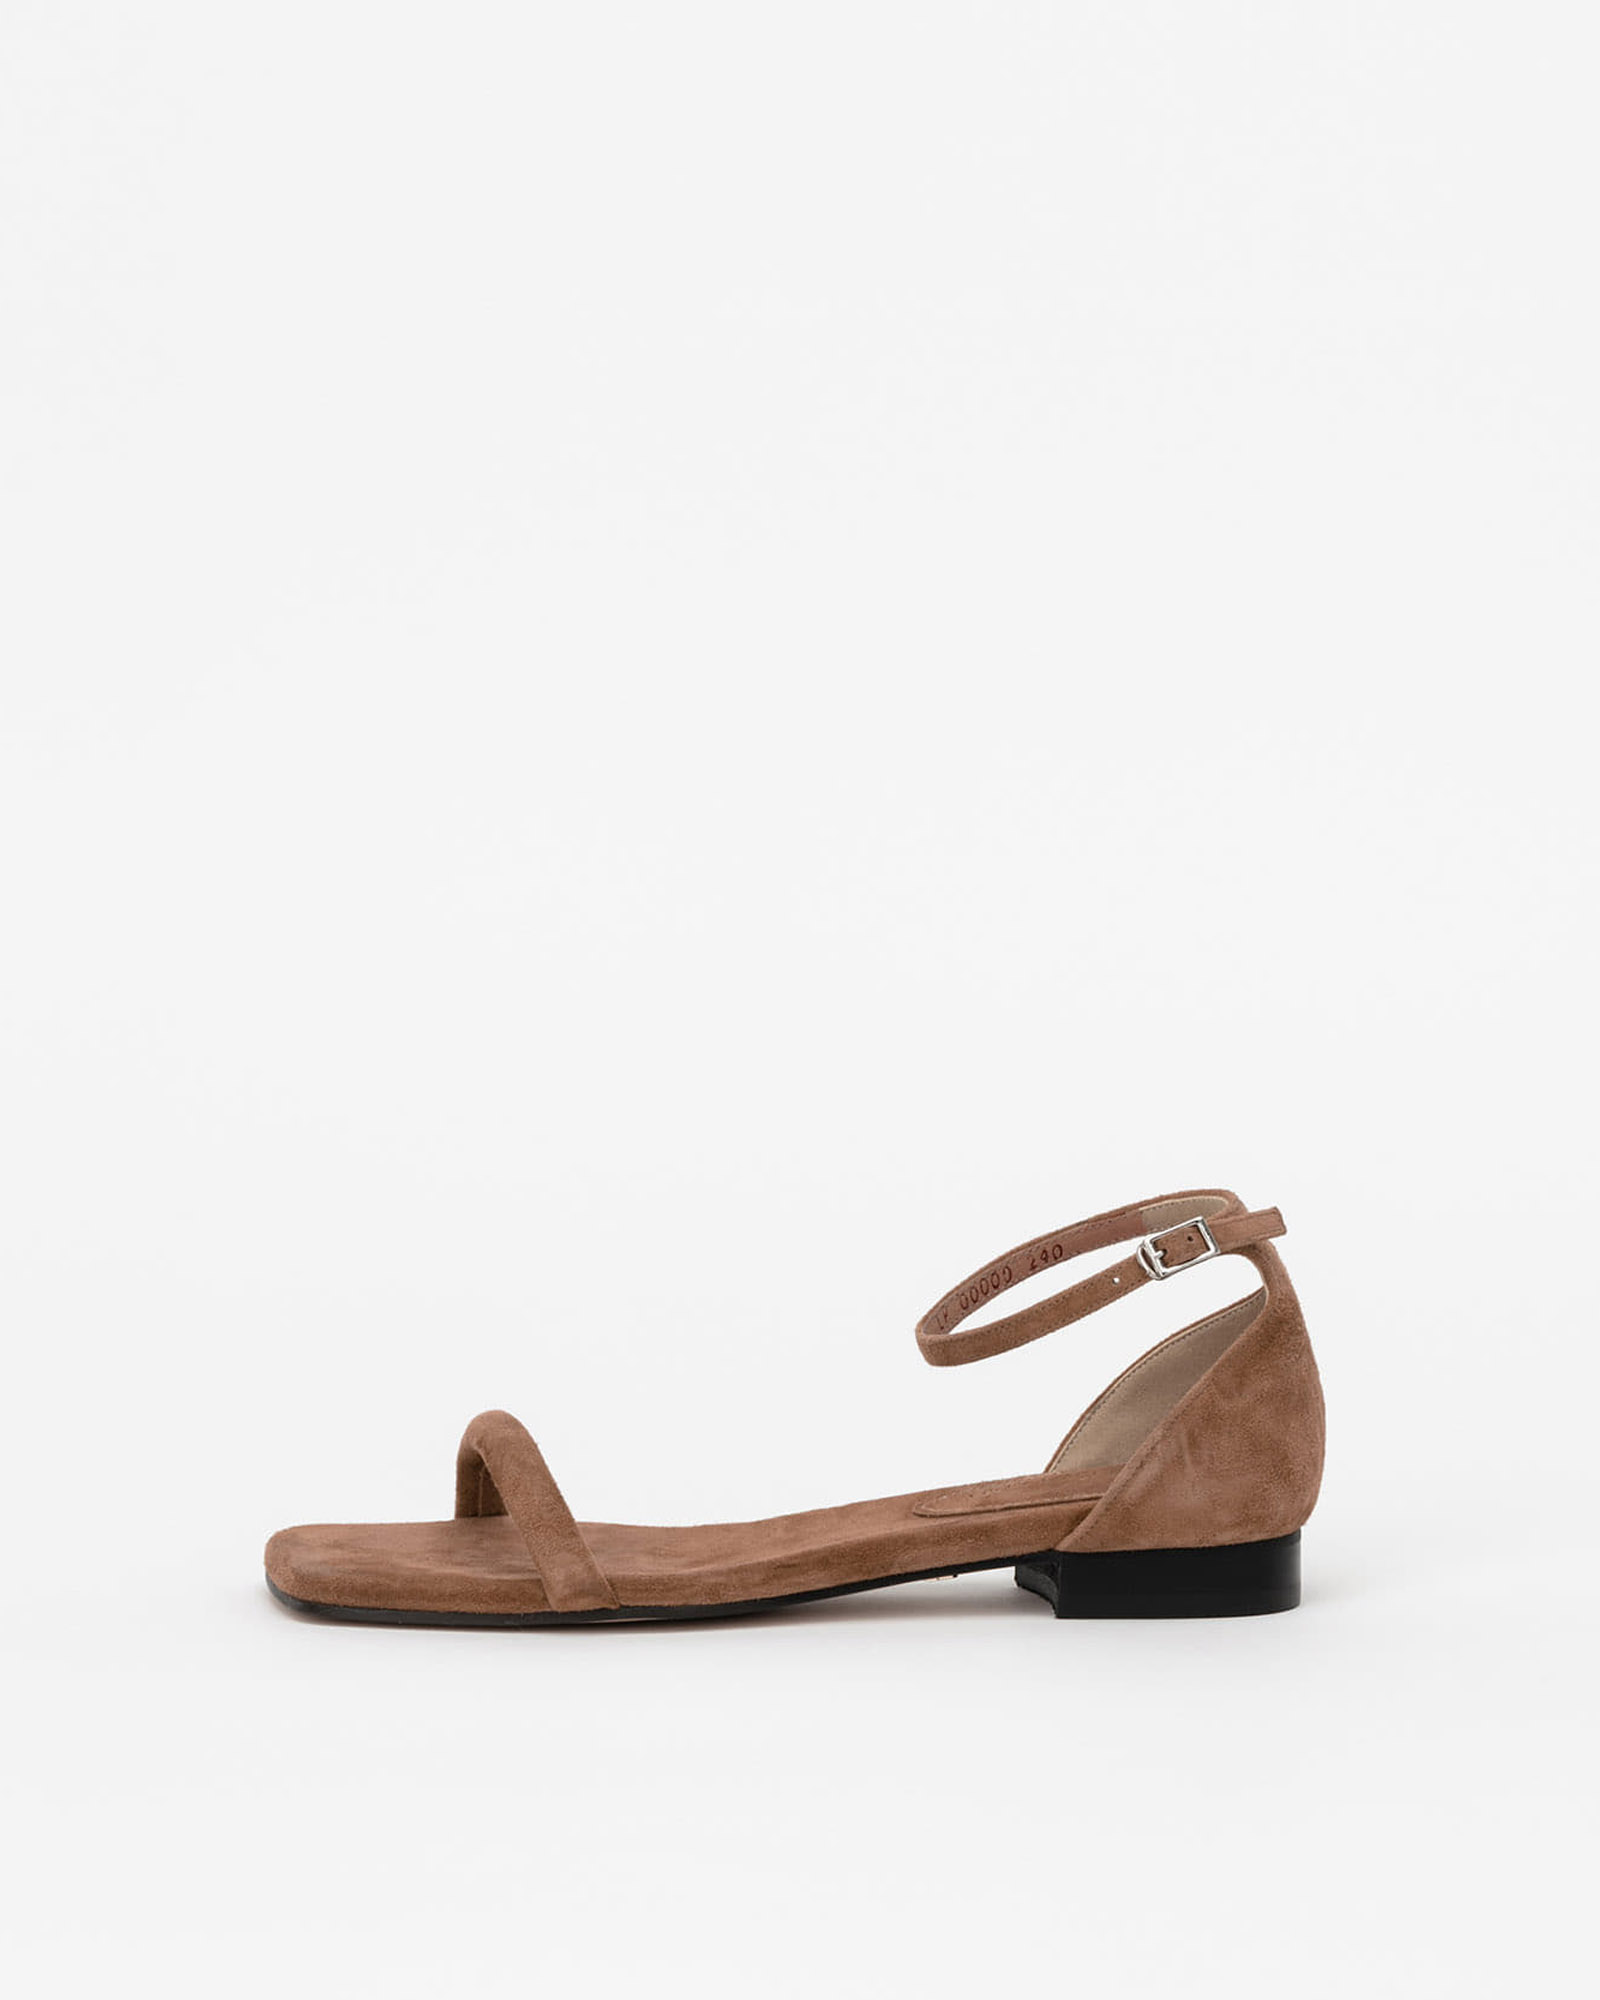 Grayon Padded Strap Flat Sandals in Mocha Brown Suede